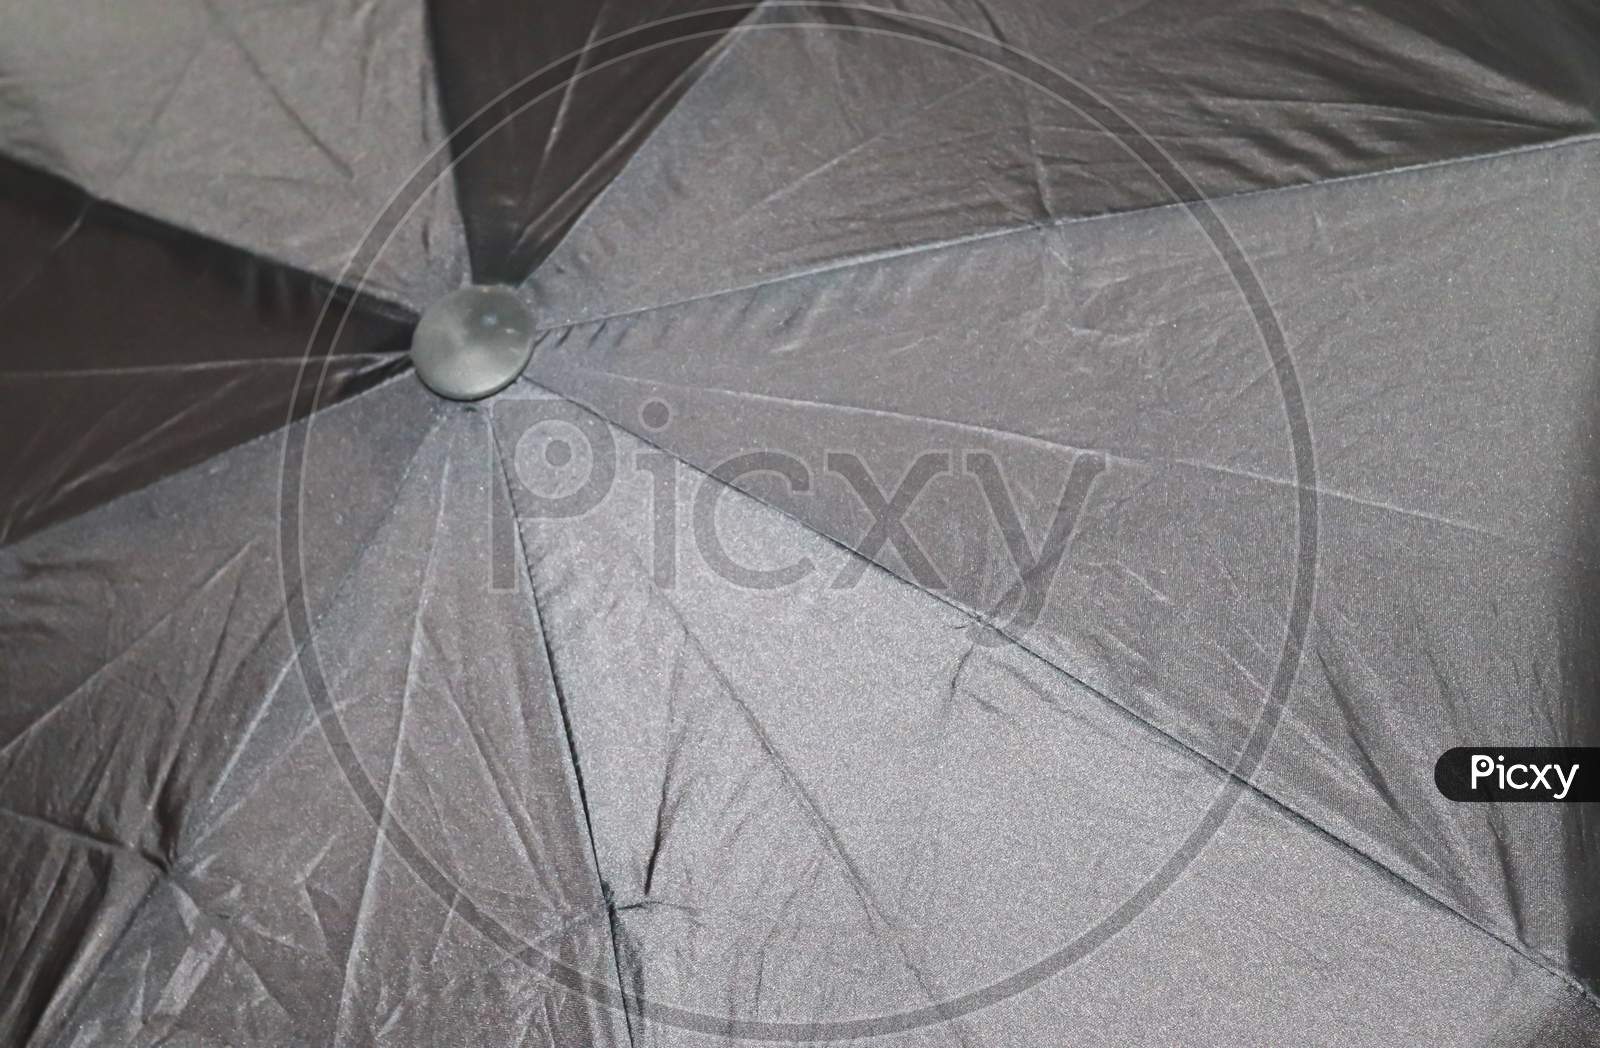 Close Up View At The Colorful Surfaces Of A Rainproof Umbrella